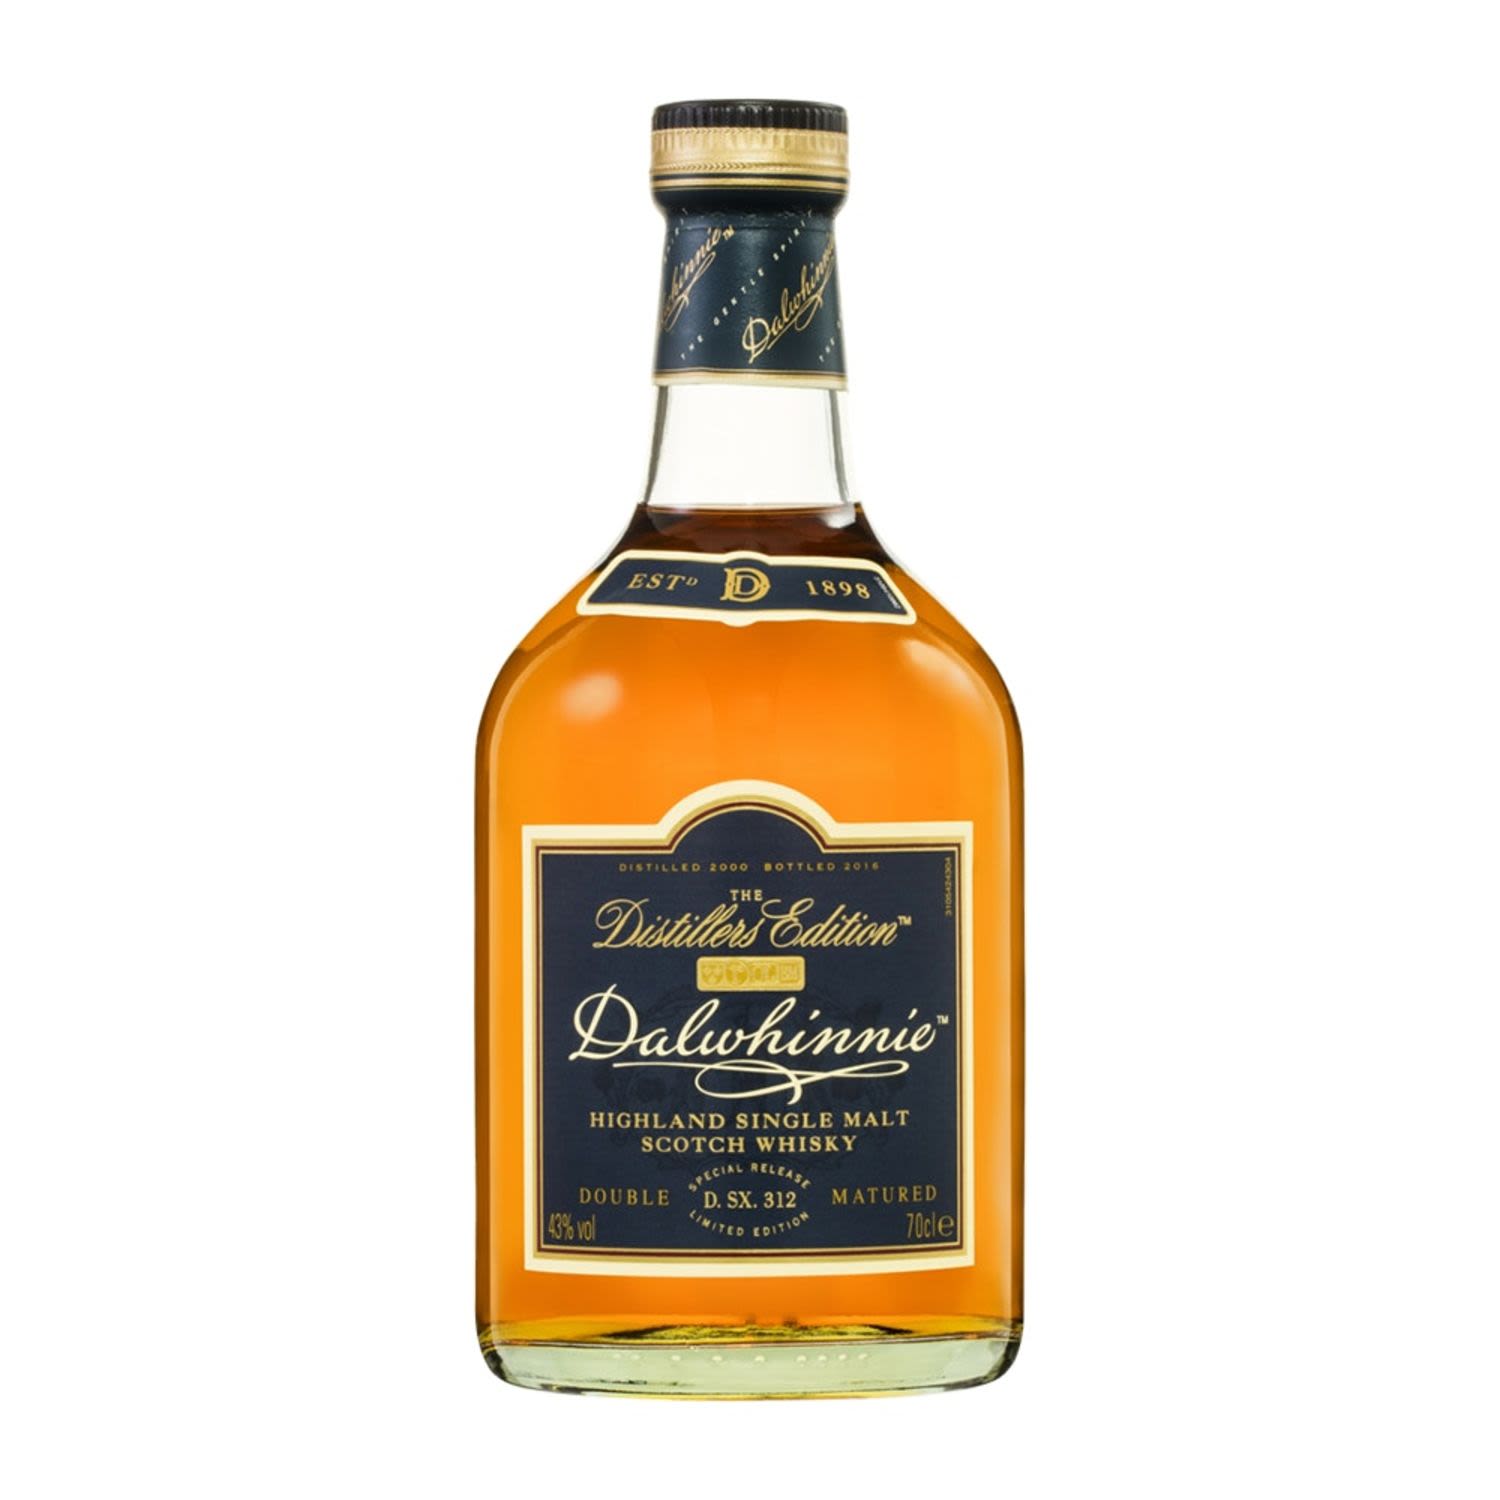 The Distillers Edition Dalwhinnie Highland Single Malt Scotch Whisky is a special release, limited edition and has been double matured.<br /> <br />Alcohol Volume: 43.00%<br /><br />Pack Format: Bottle<br /><br />Standard Drinks: 23.7</br /><br />Pack Type: Bottle<br /><br />Country of Origin: Scotland<br />